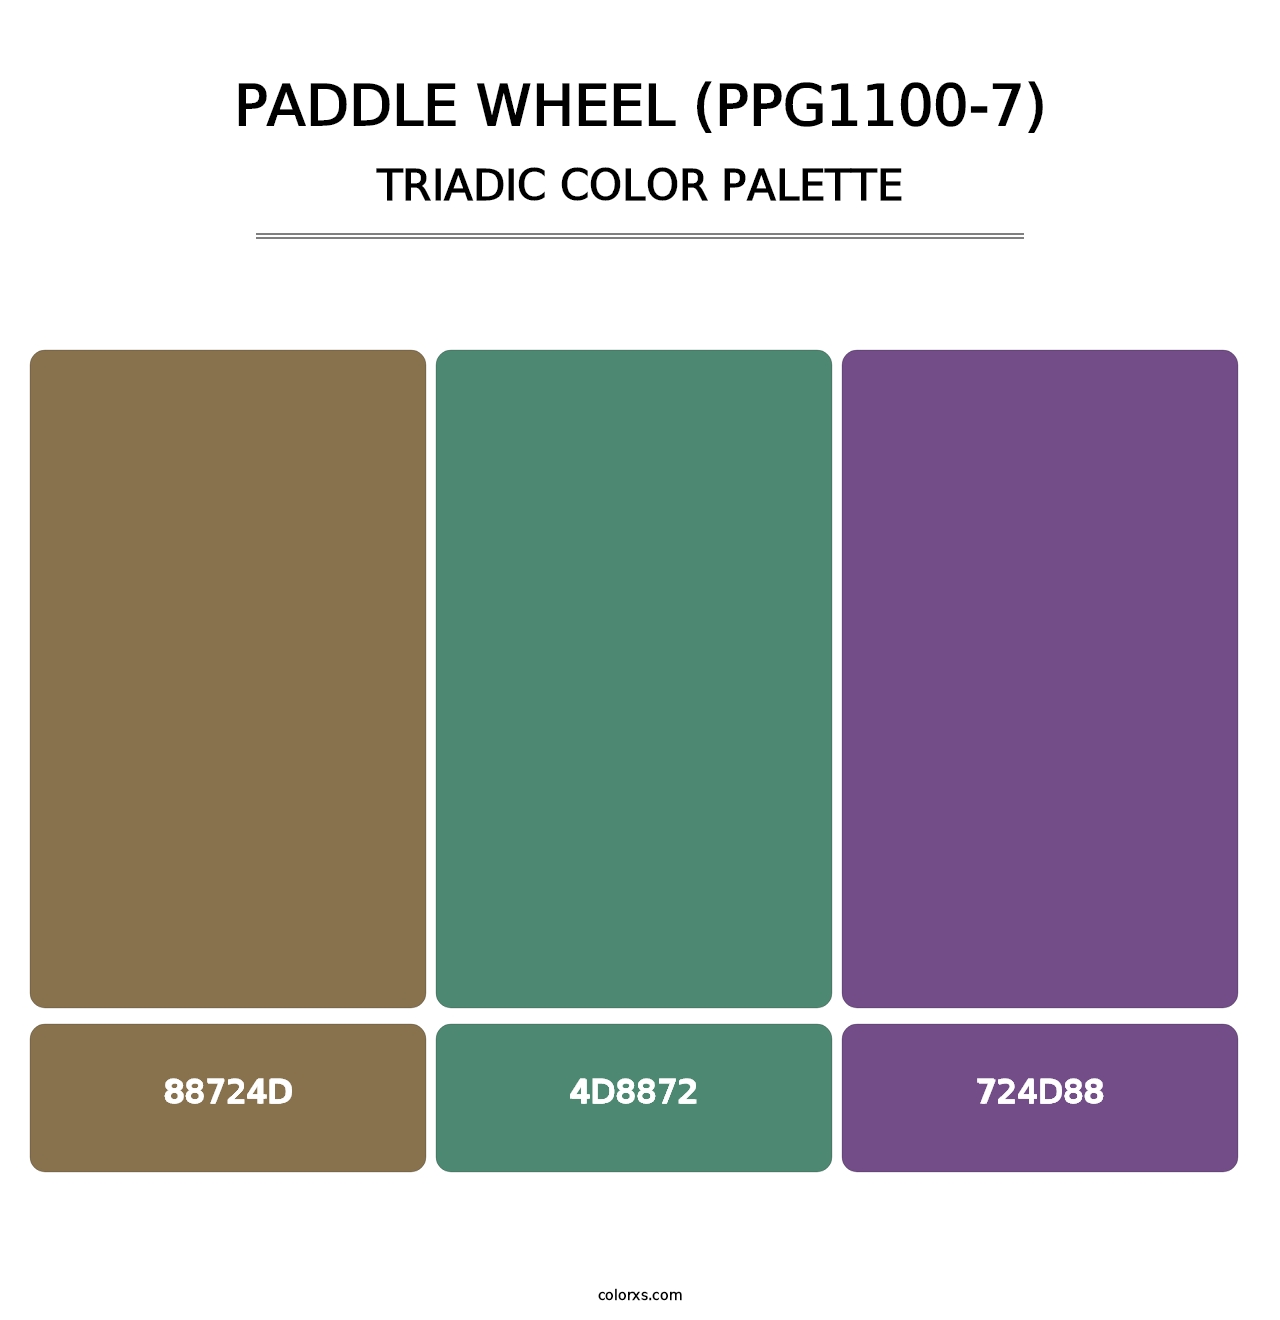 Paddle Wheel (PPG1100-7) - Triadic Color Palette